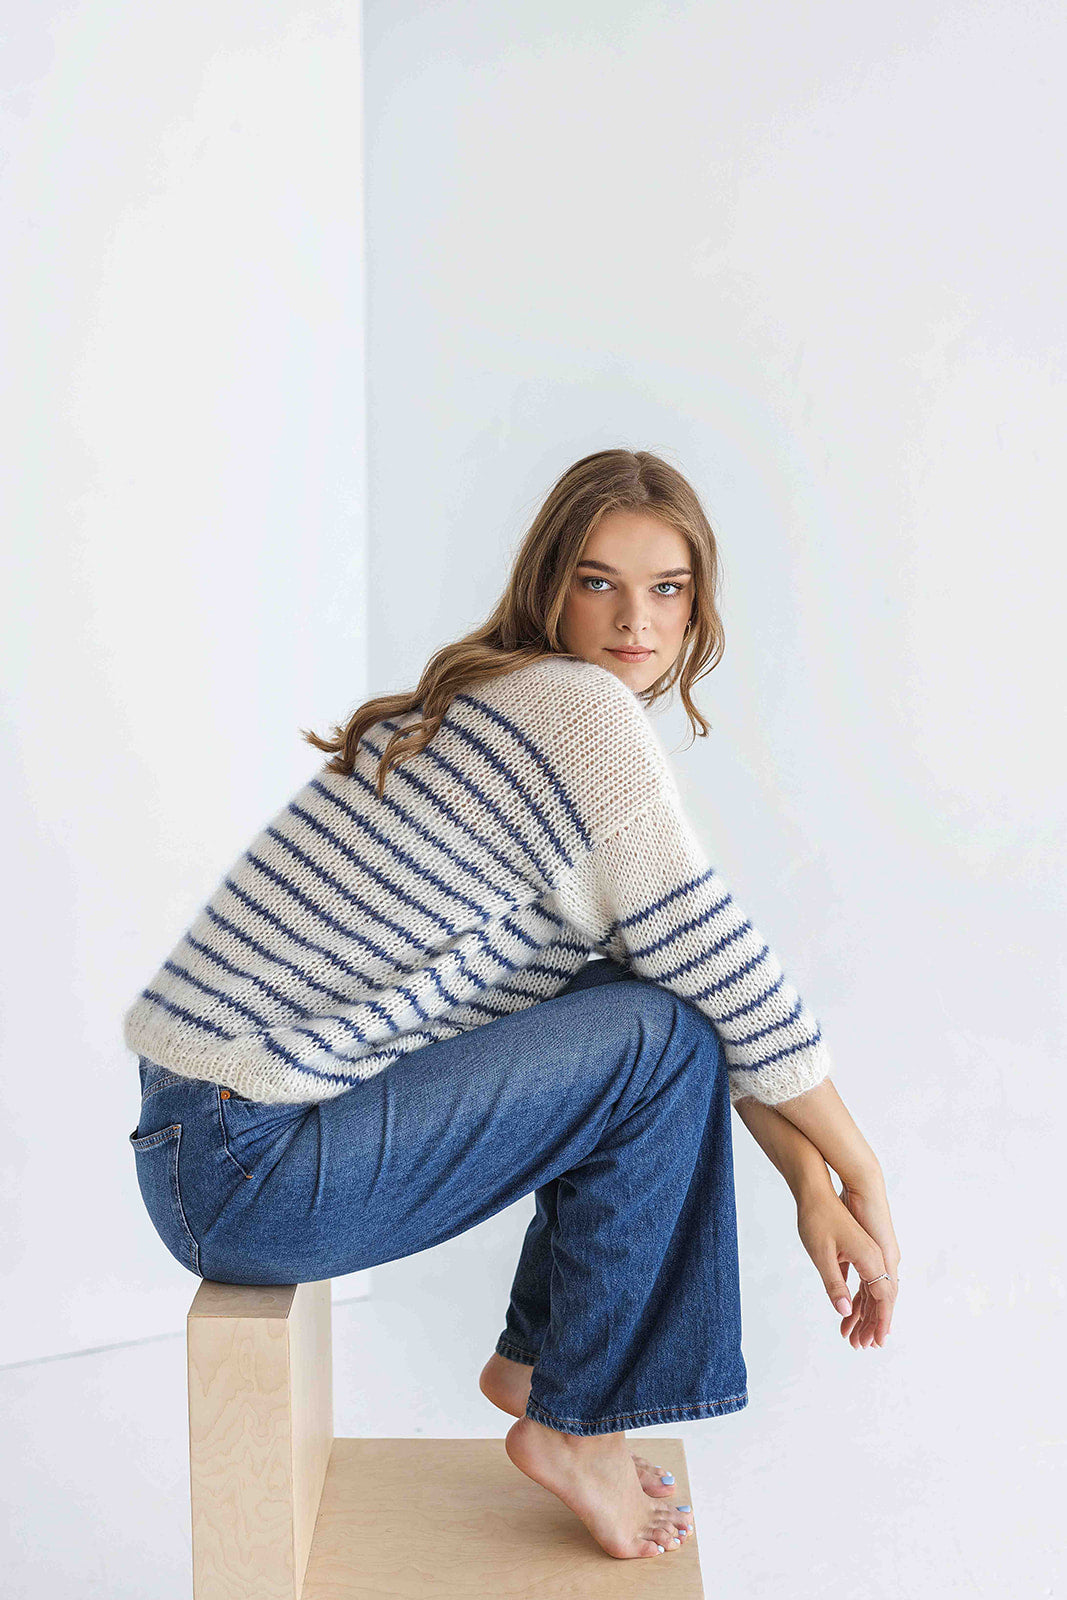 Striped white and blue mohair sweater, cable knit alpaca wool blend woman jumper, hand knitted slightly oversized pullover, fluffy mohair